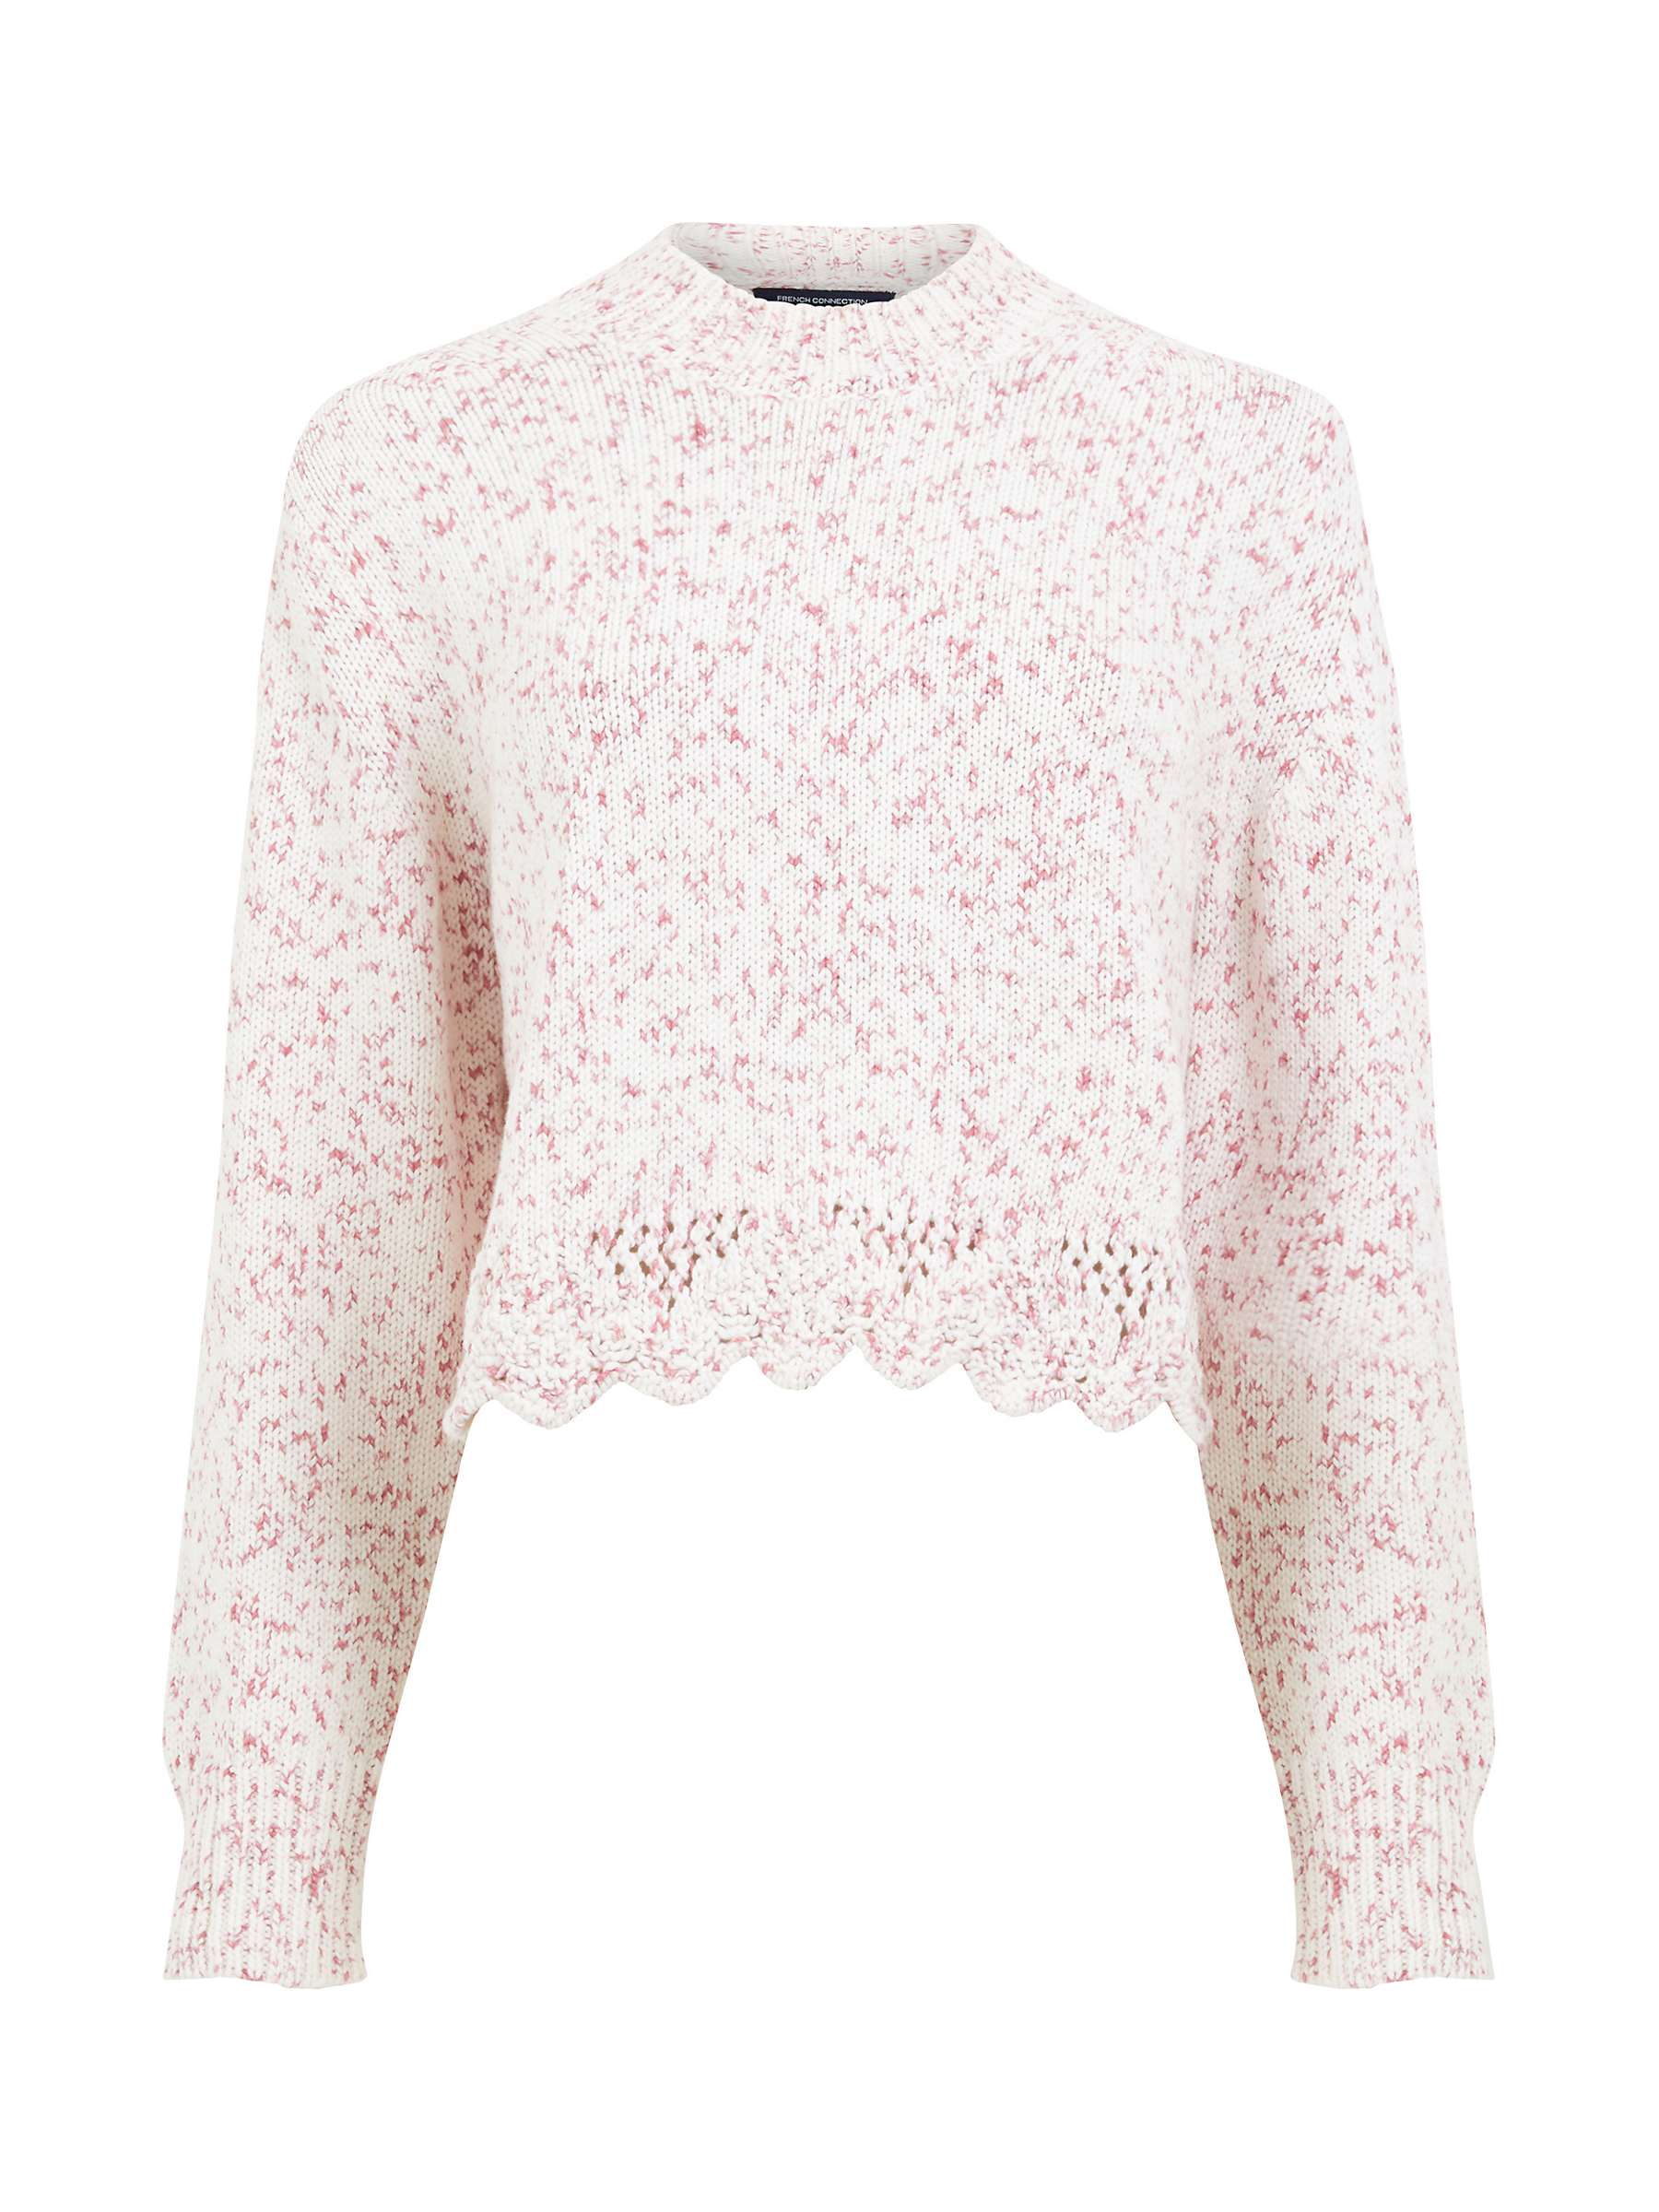 Buy French Connection Nevanna Scallop Hem Jumper Online at johnlewis.com